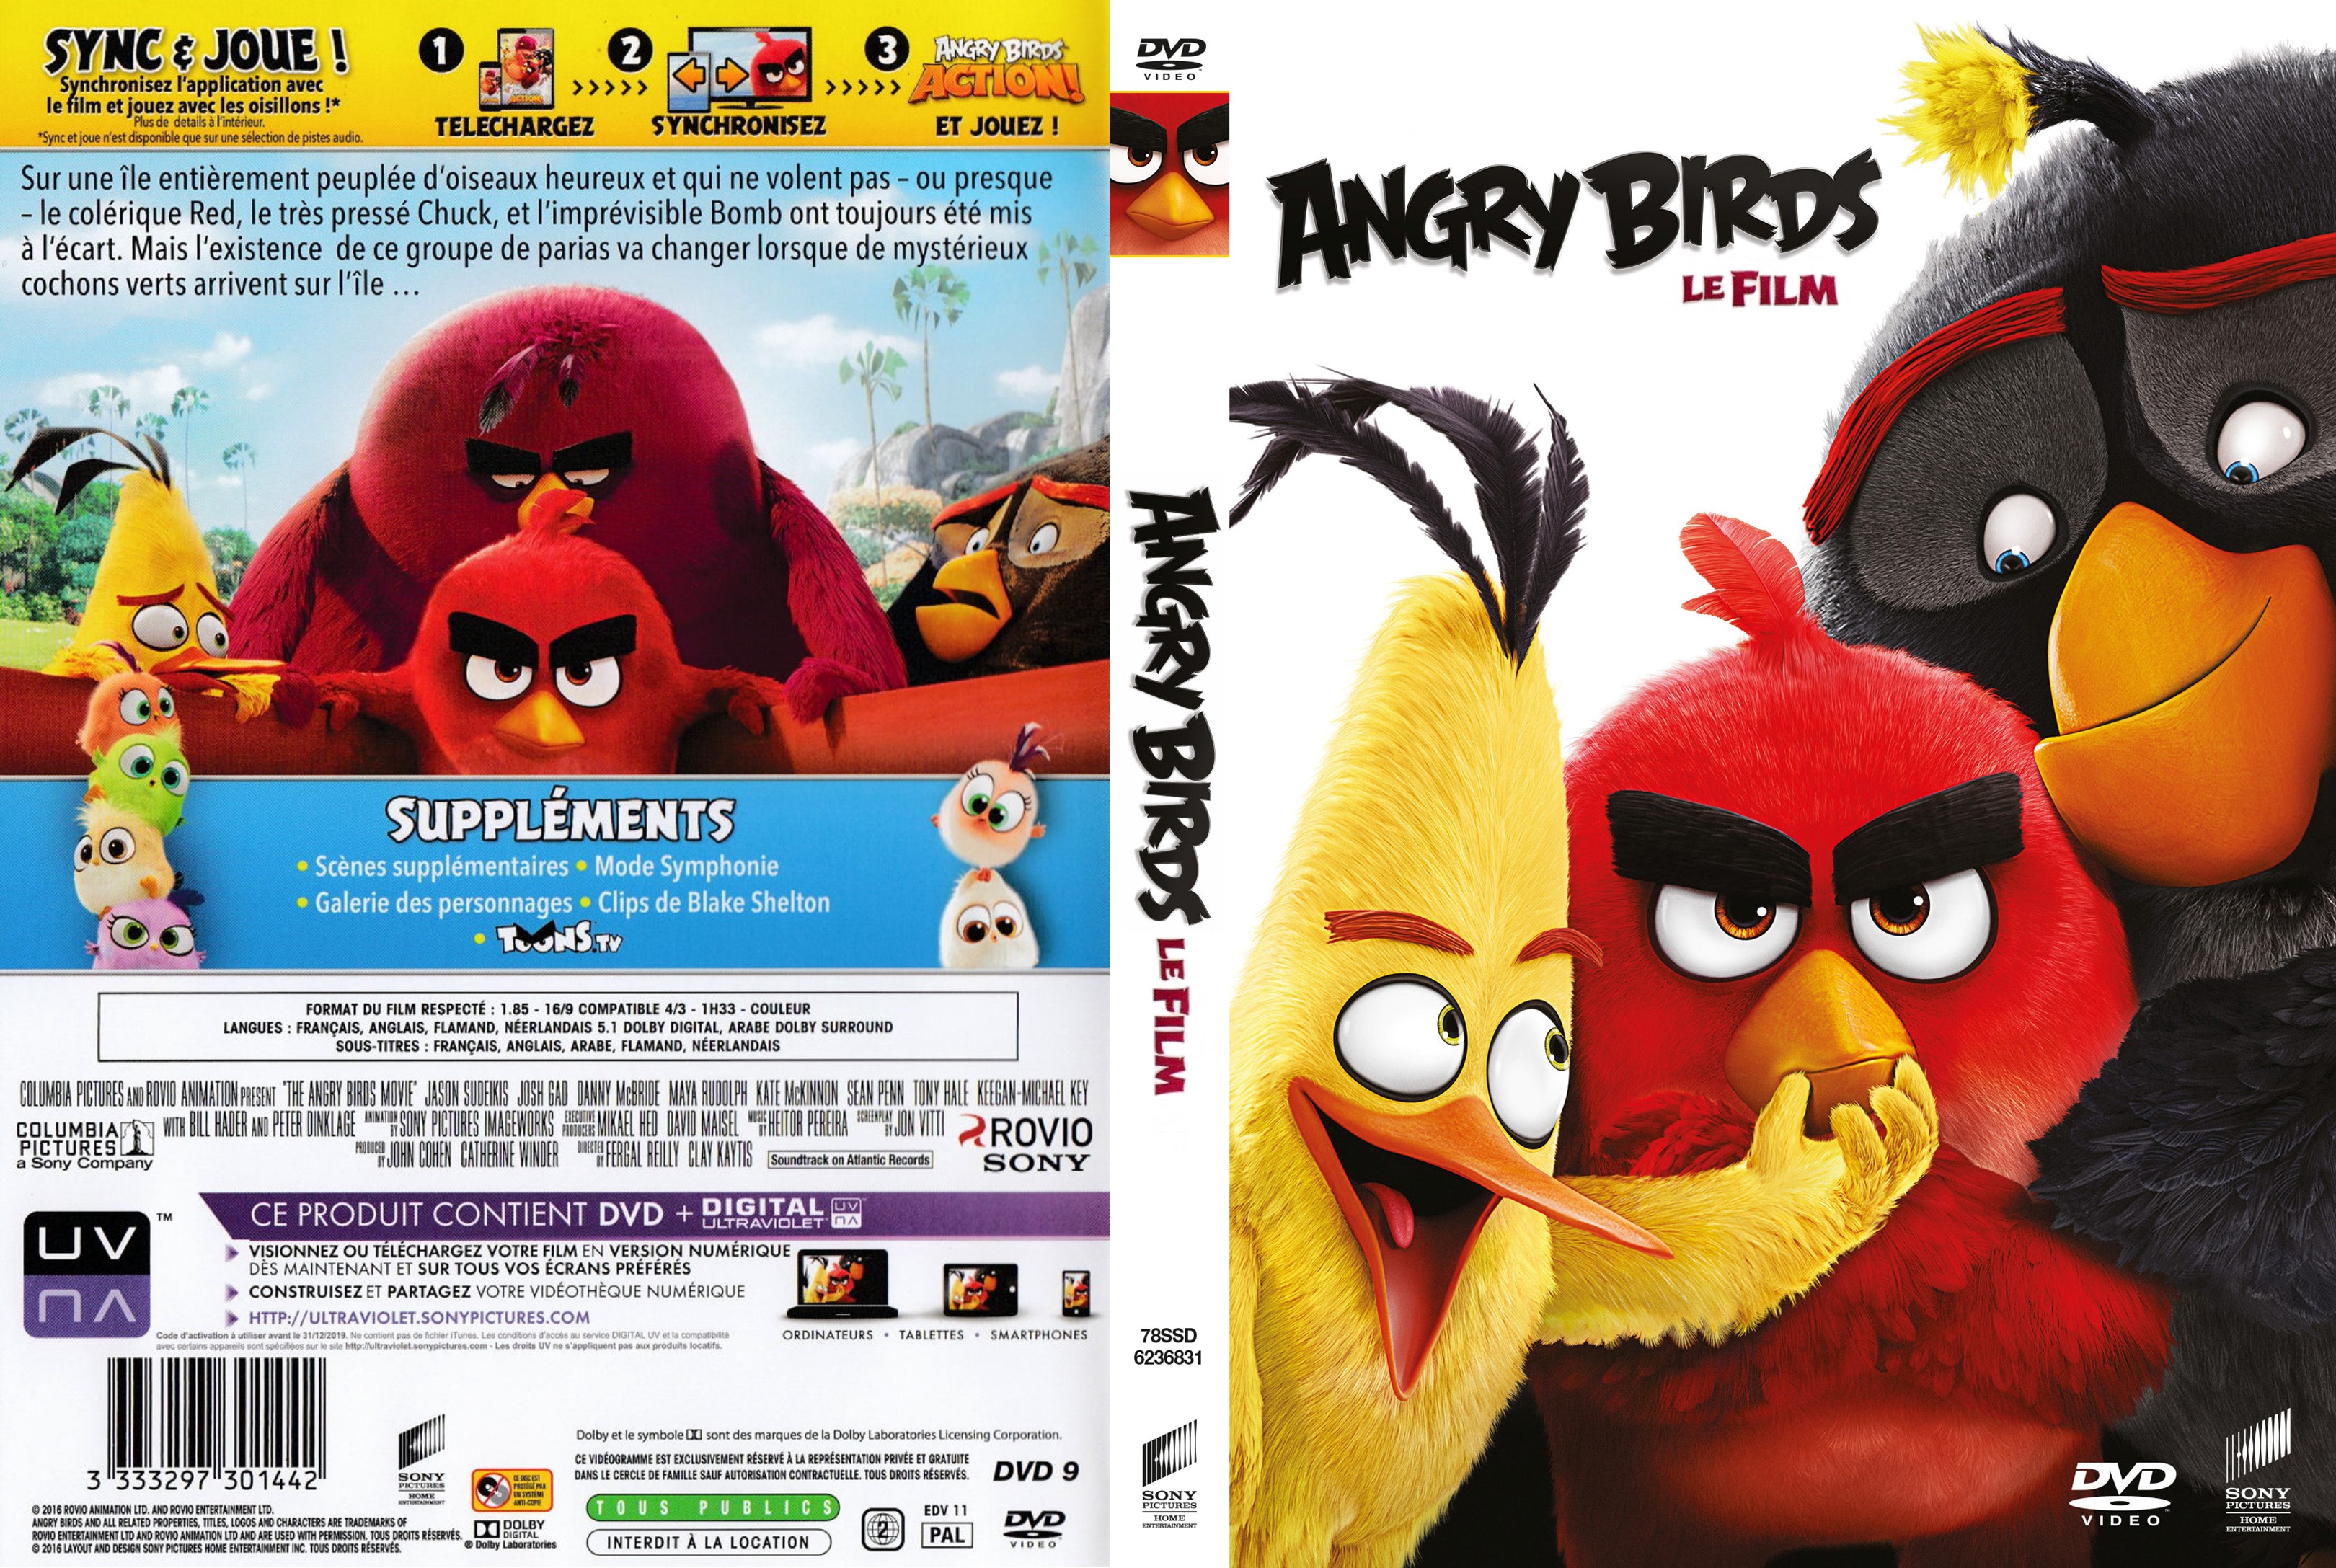 Jaquette DVD Angry Birds custom